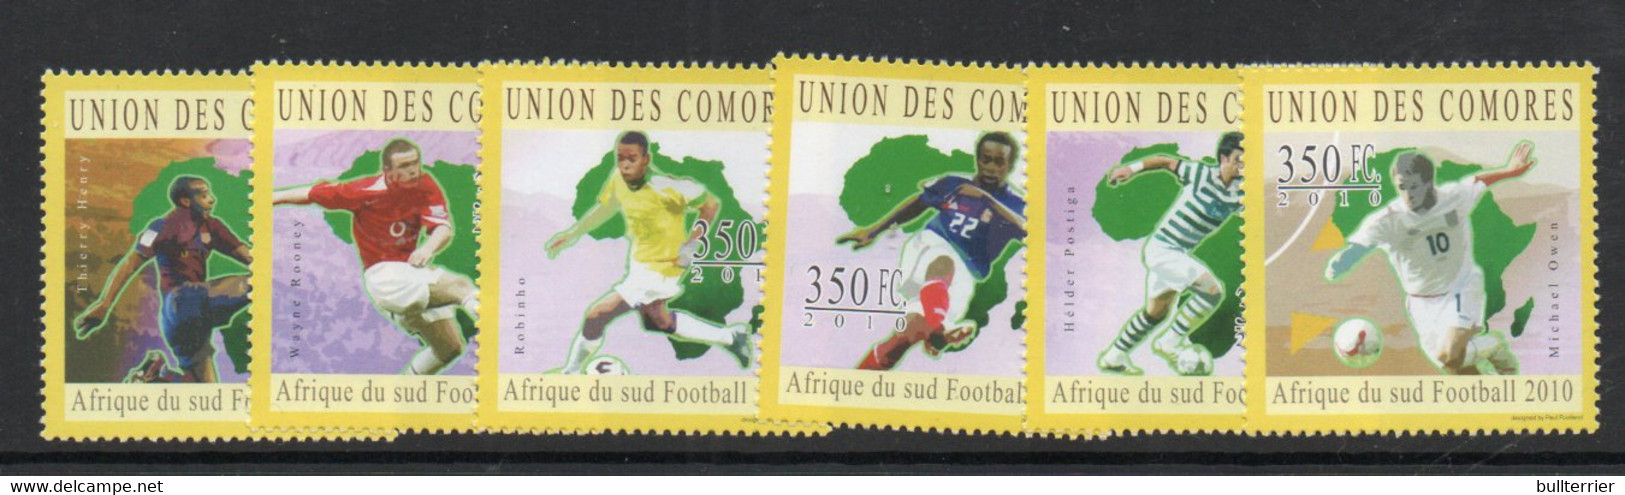 SOCCER - COMOROS - 2010 - SOUTH AFRICA WORLD CUP  SET  OF 4  MINT NEVER HINGED - 2010 – Sud Africa